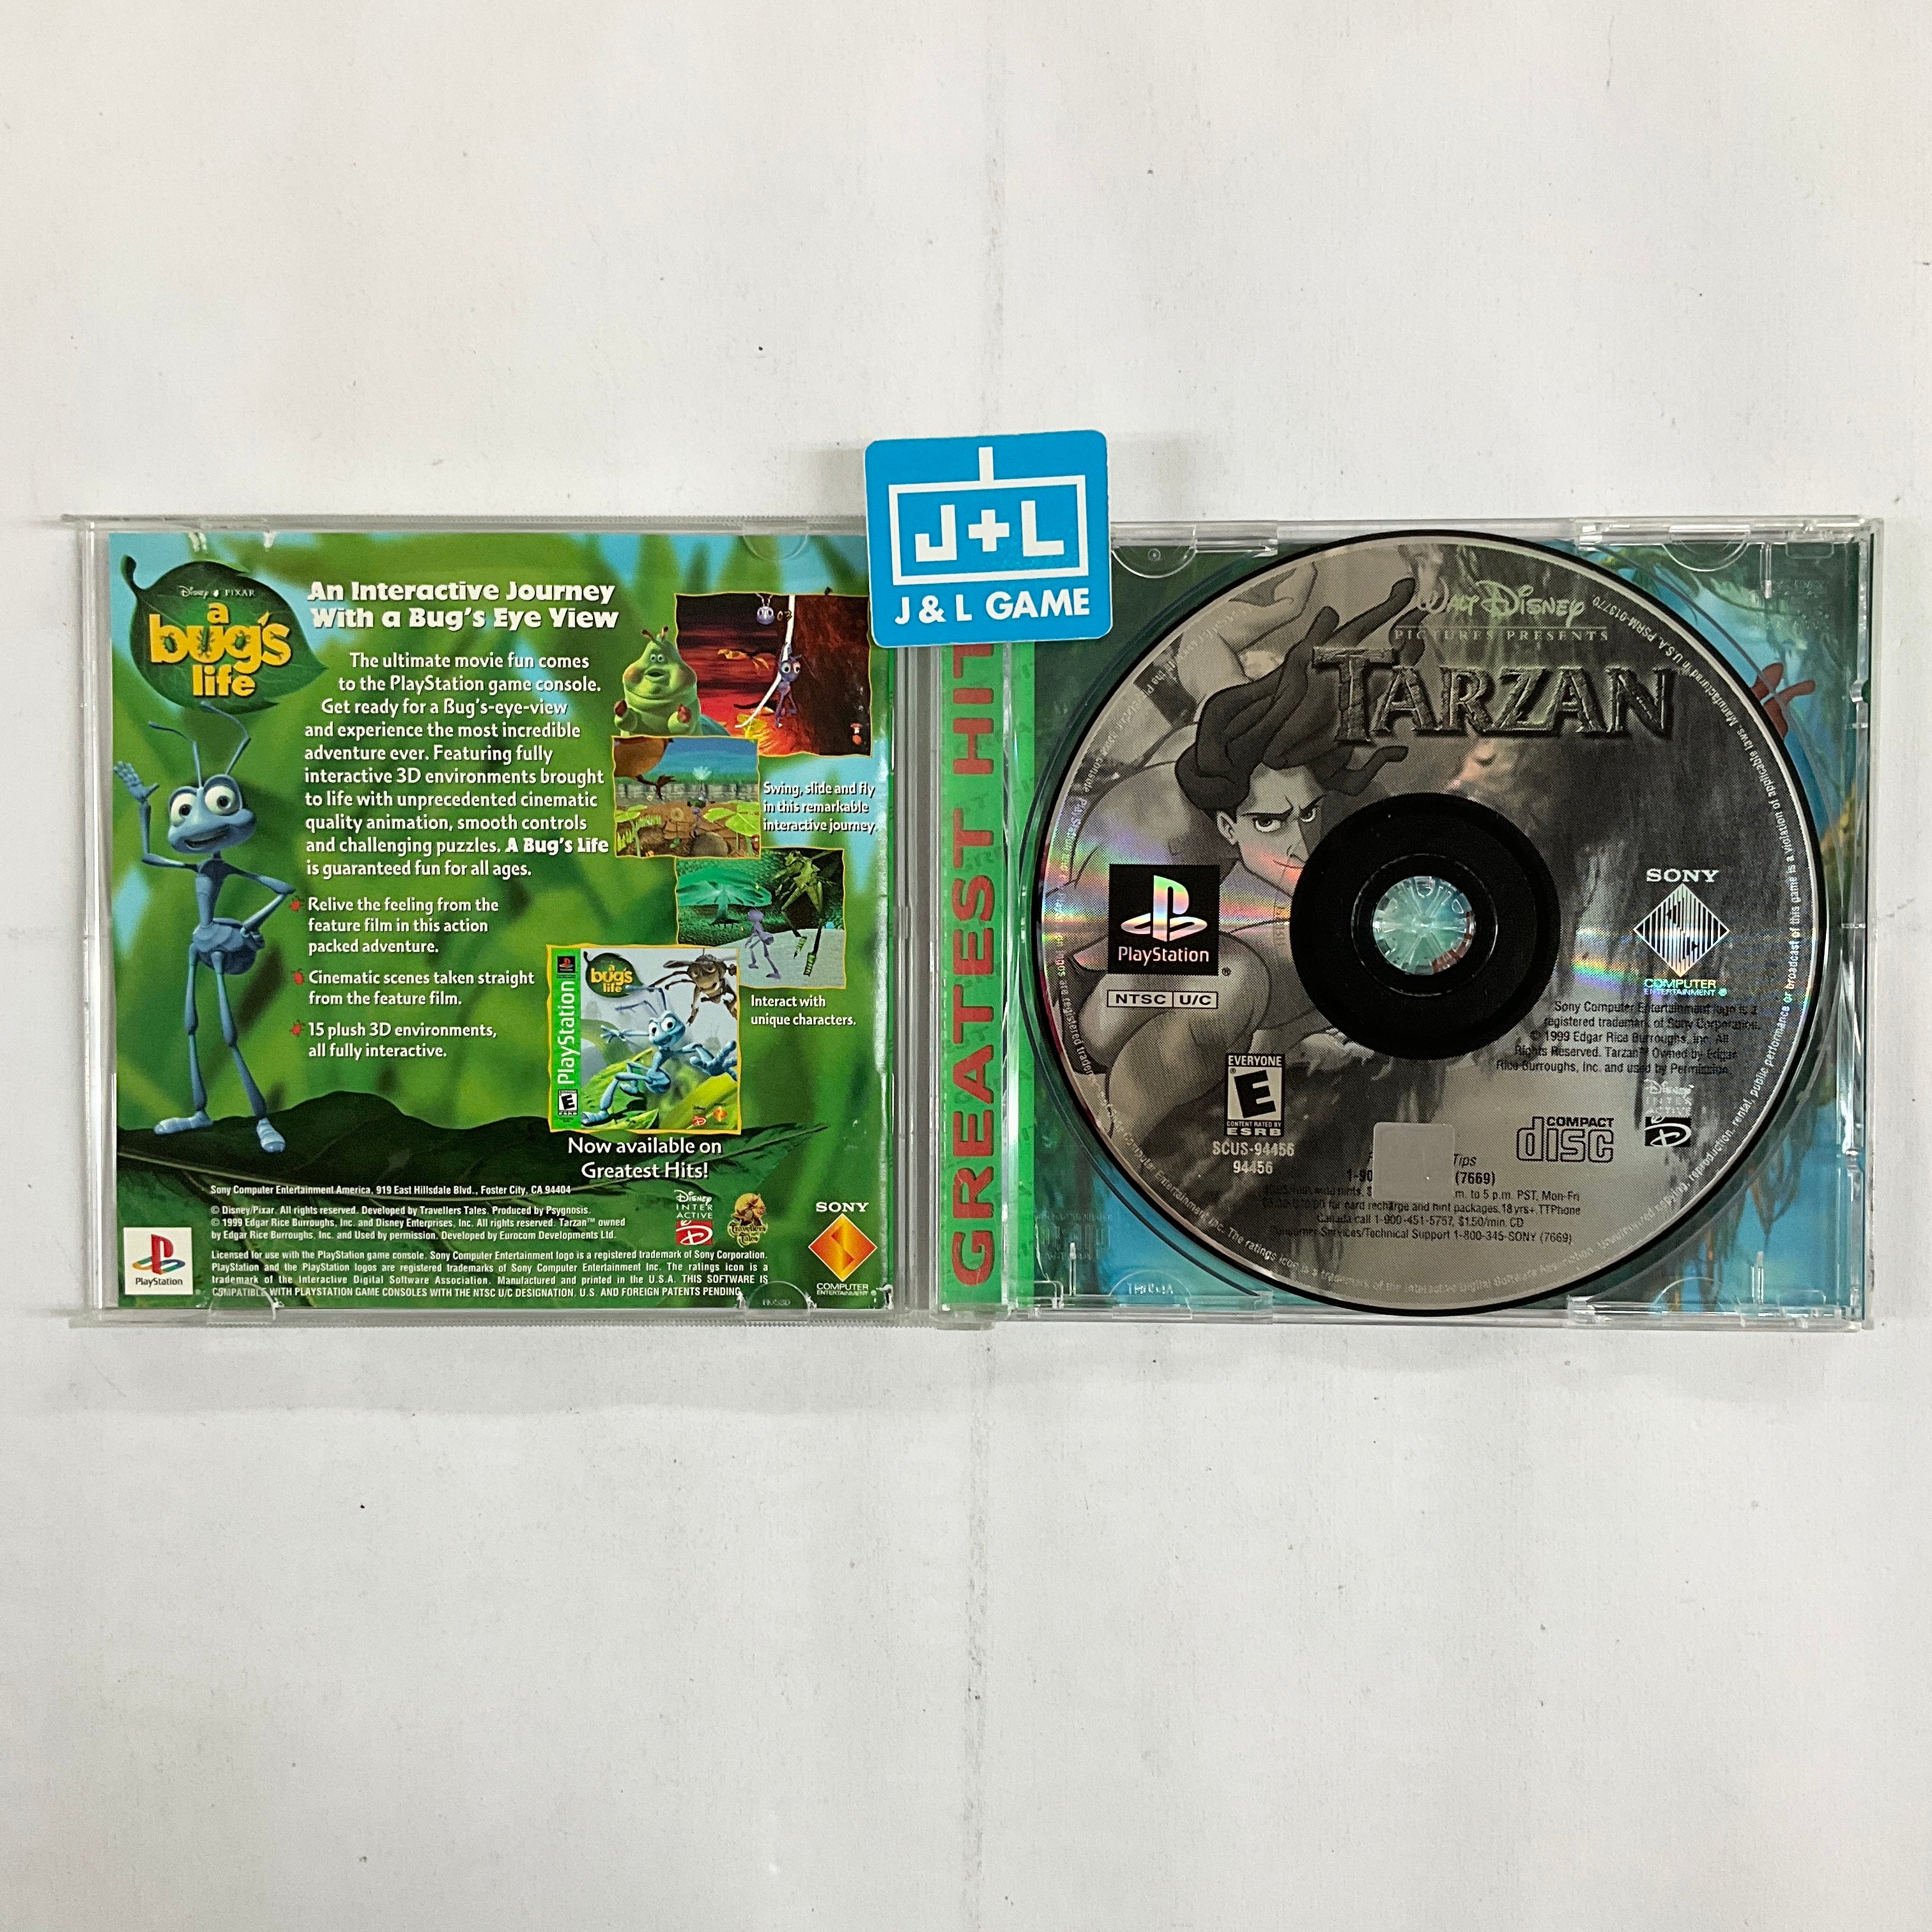 Walt Disney Pictures Presents: Tarzan (Greatest Hits) - PlayStation 1 [Pre-Owned] Video Games SCEA   